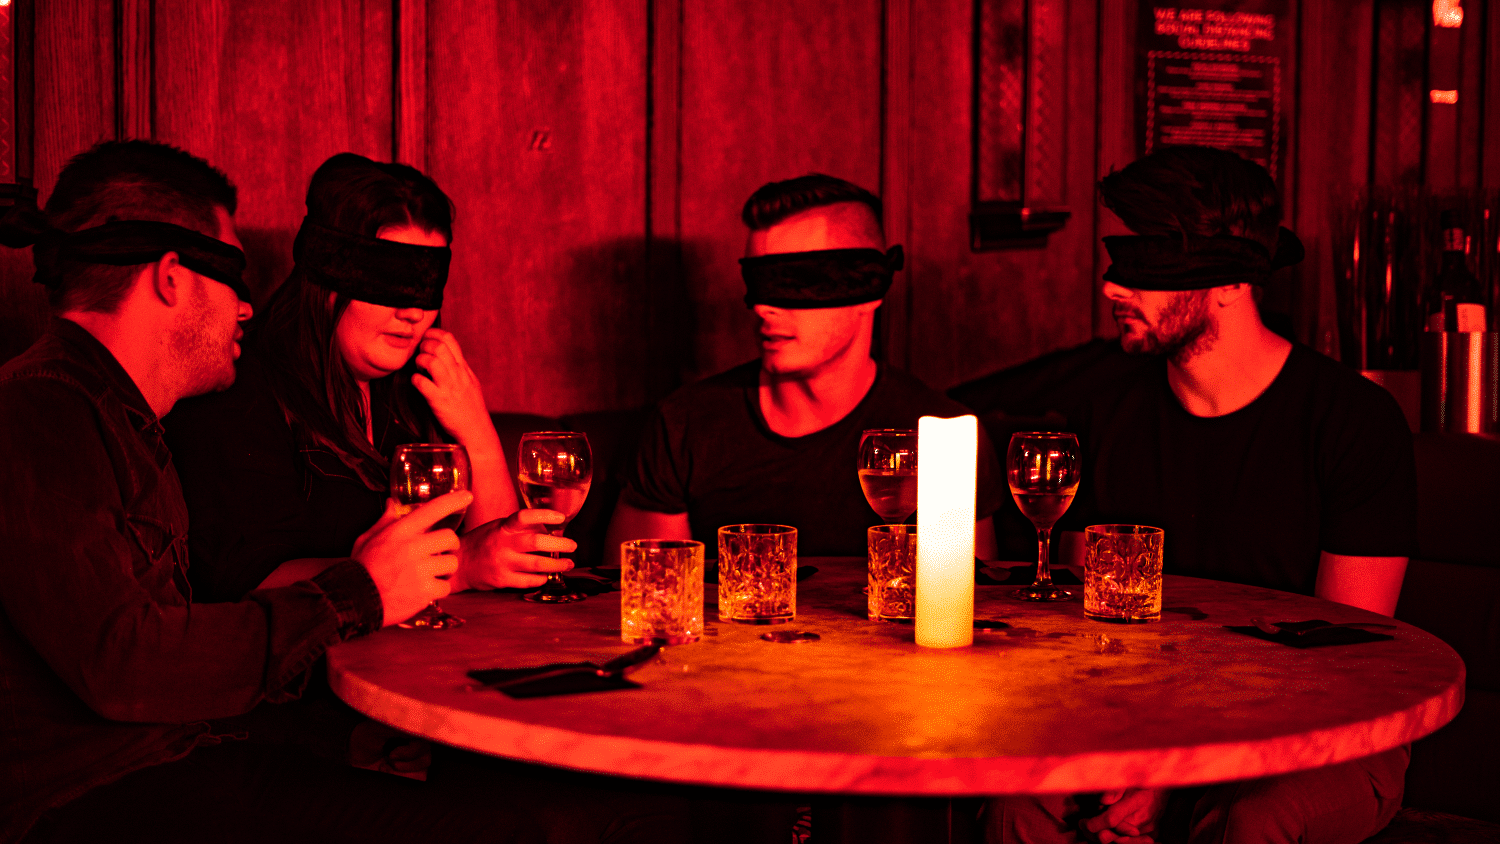 A group of four people sitting blindfolded at a table during the Dining in the Dark experience.